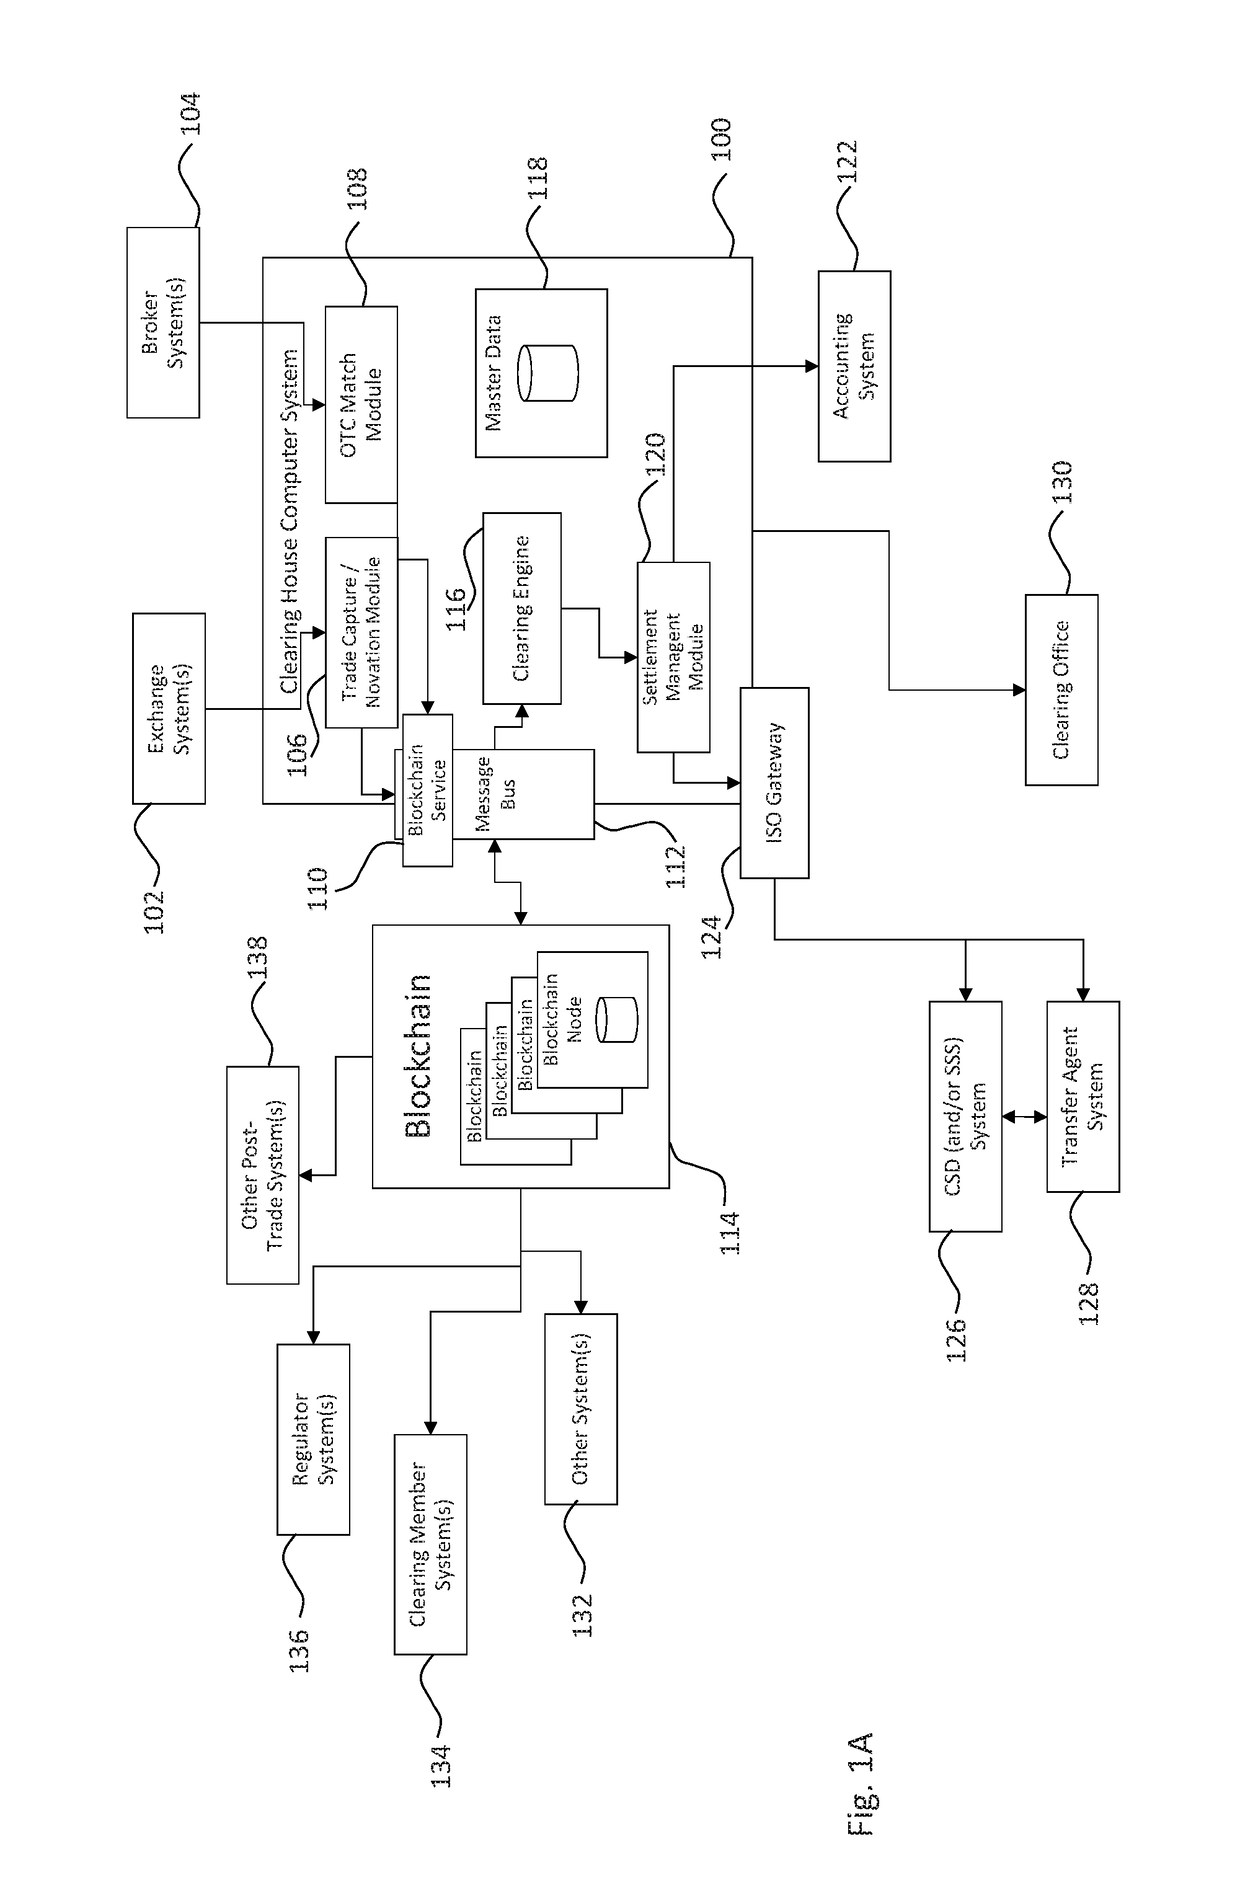 Systems and methods for storing and sharing transactional data using a distributed computing systems